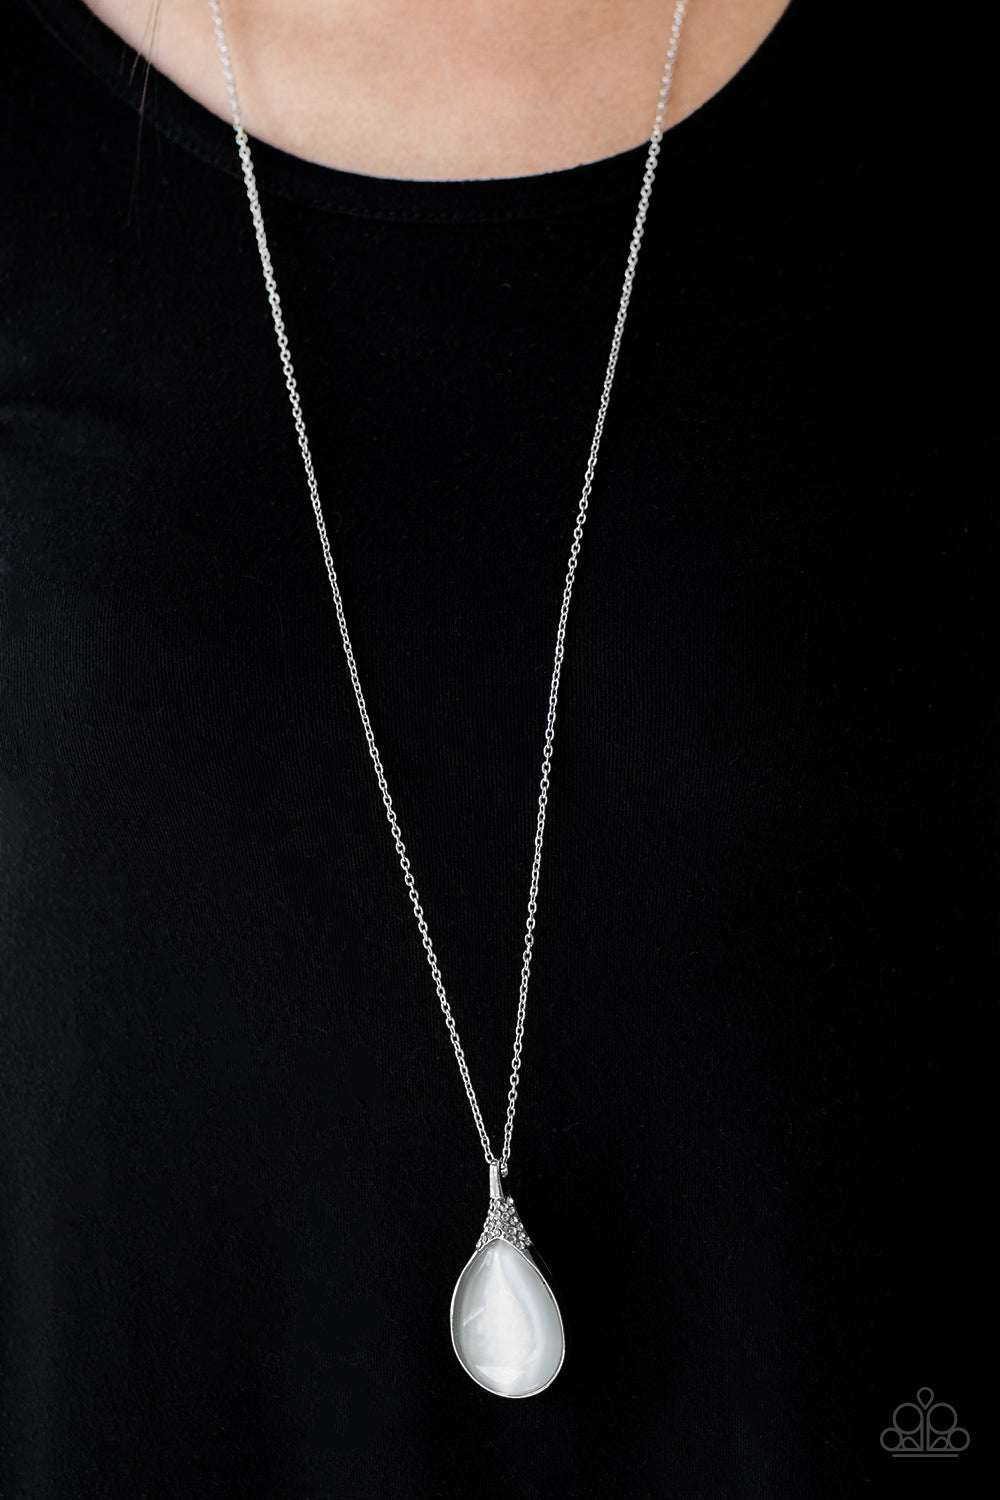 Timelessly Tranquil - White - Paparazzi necklace